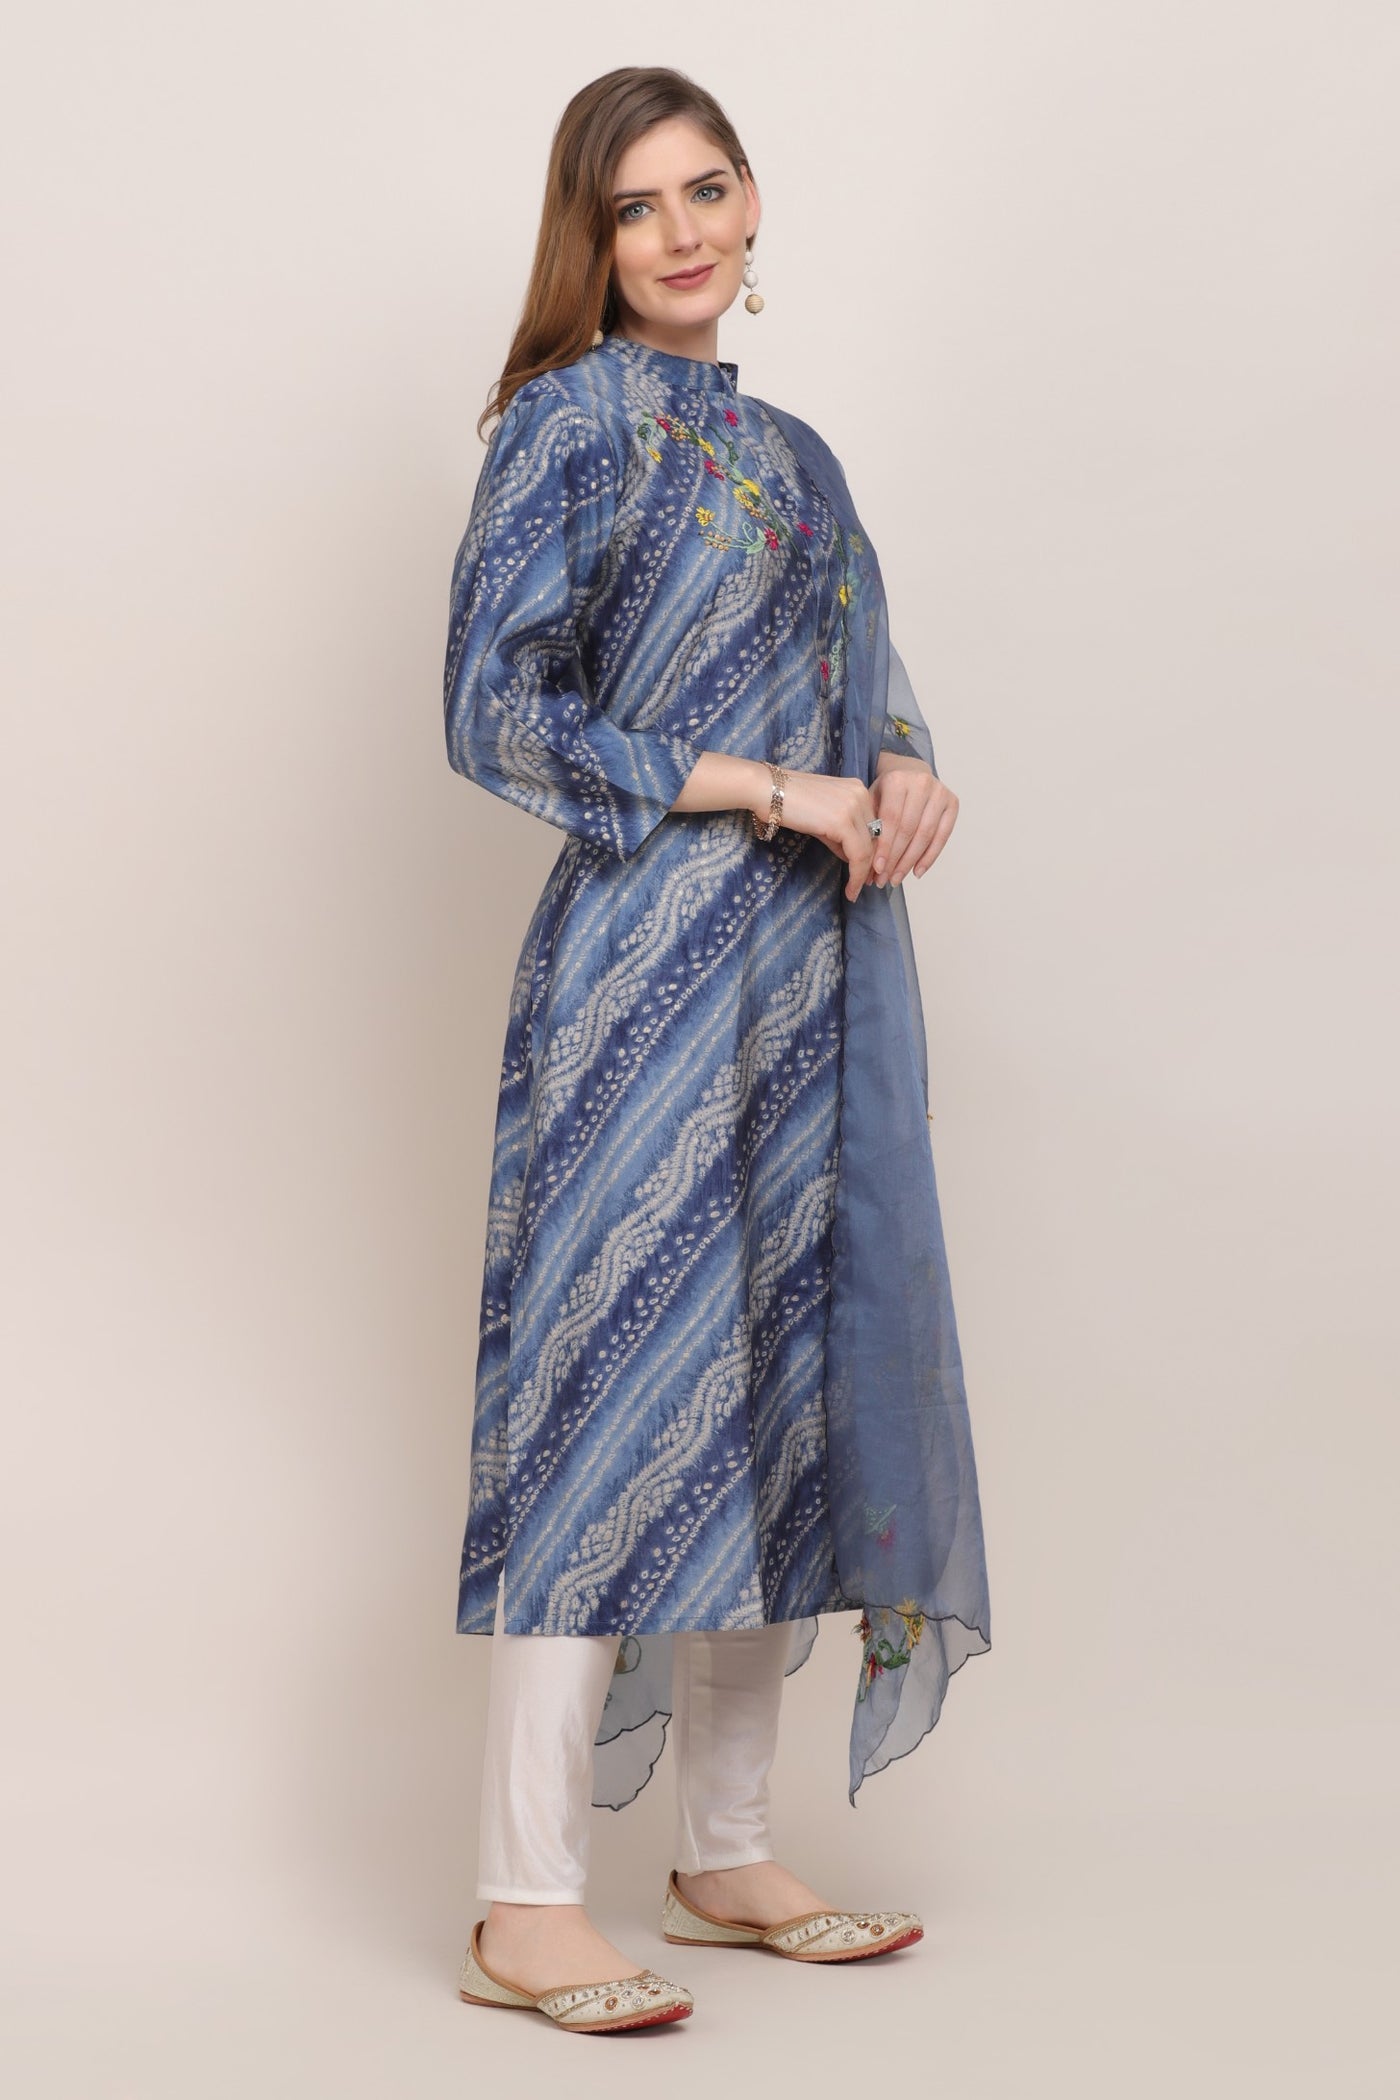 Elegant dark blue color tie and dyed bandhini embroidered kurti